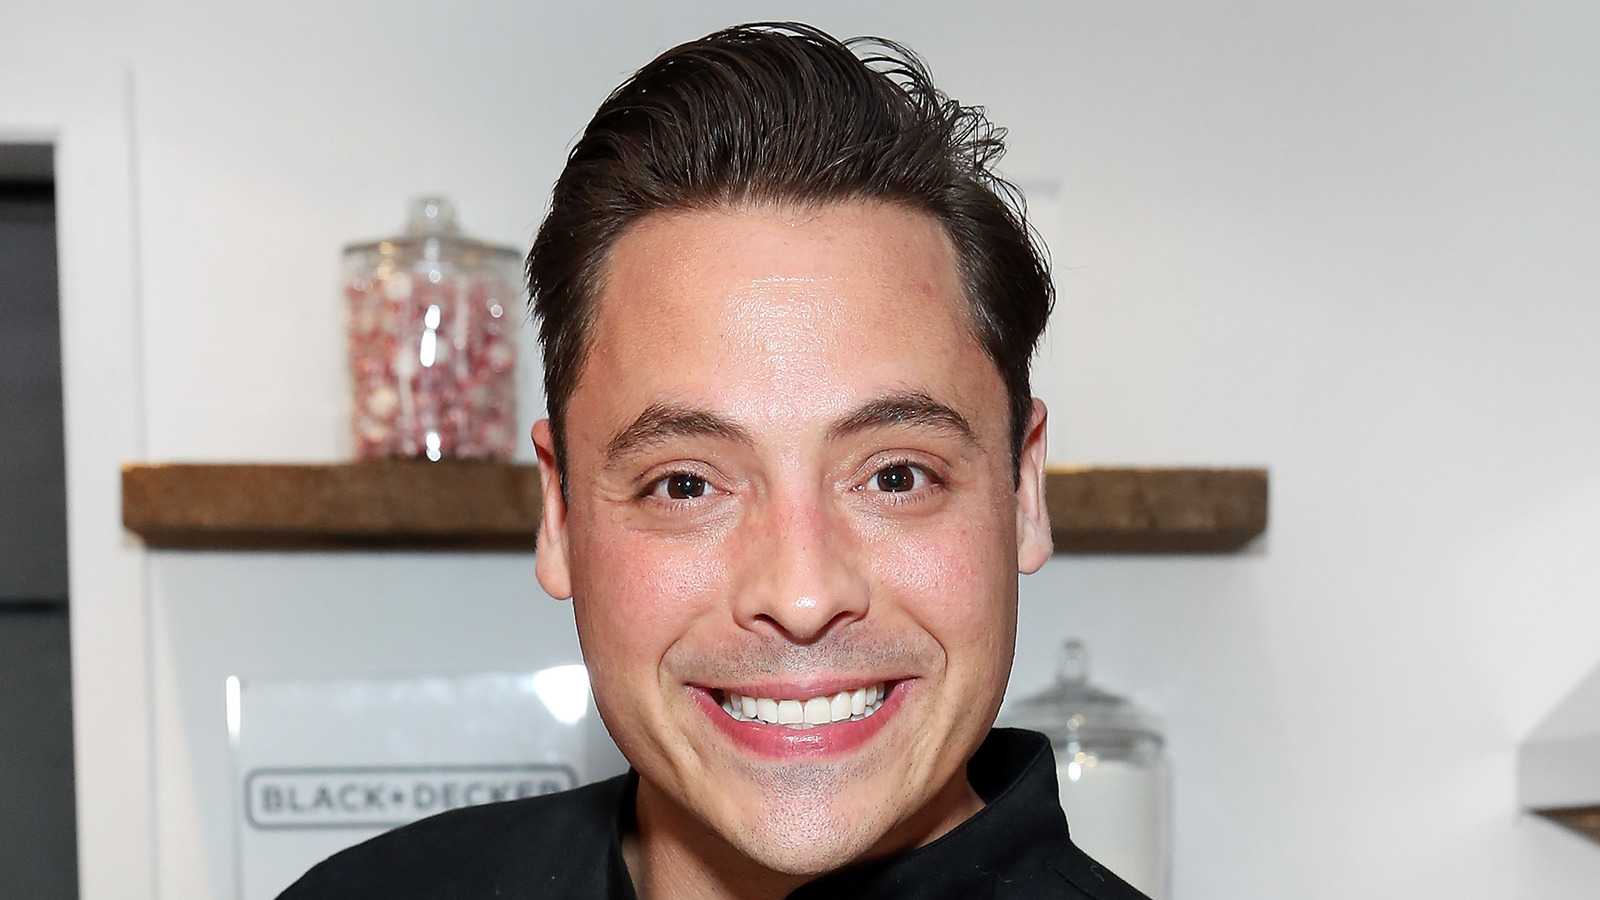 https://www.mashed.com/img/gallery/jeff-mauro-talks-kitchen-crash-and-shares-his-best-cooking-tips-exclusive-interview/l-intro-1626200789.jpg